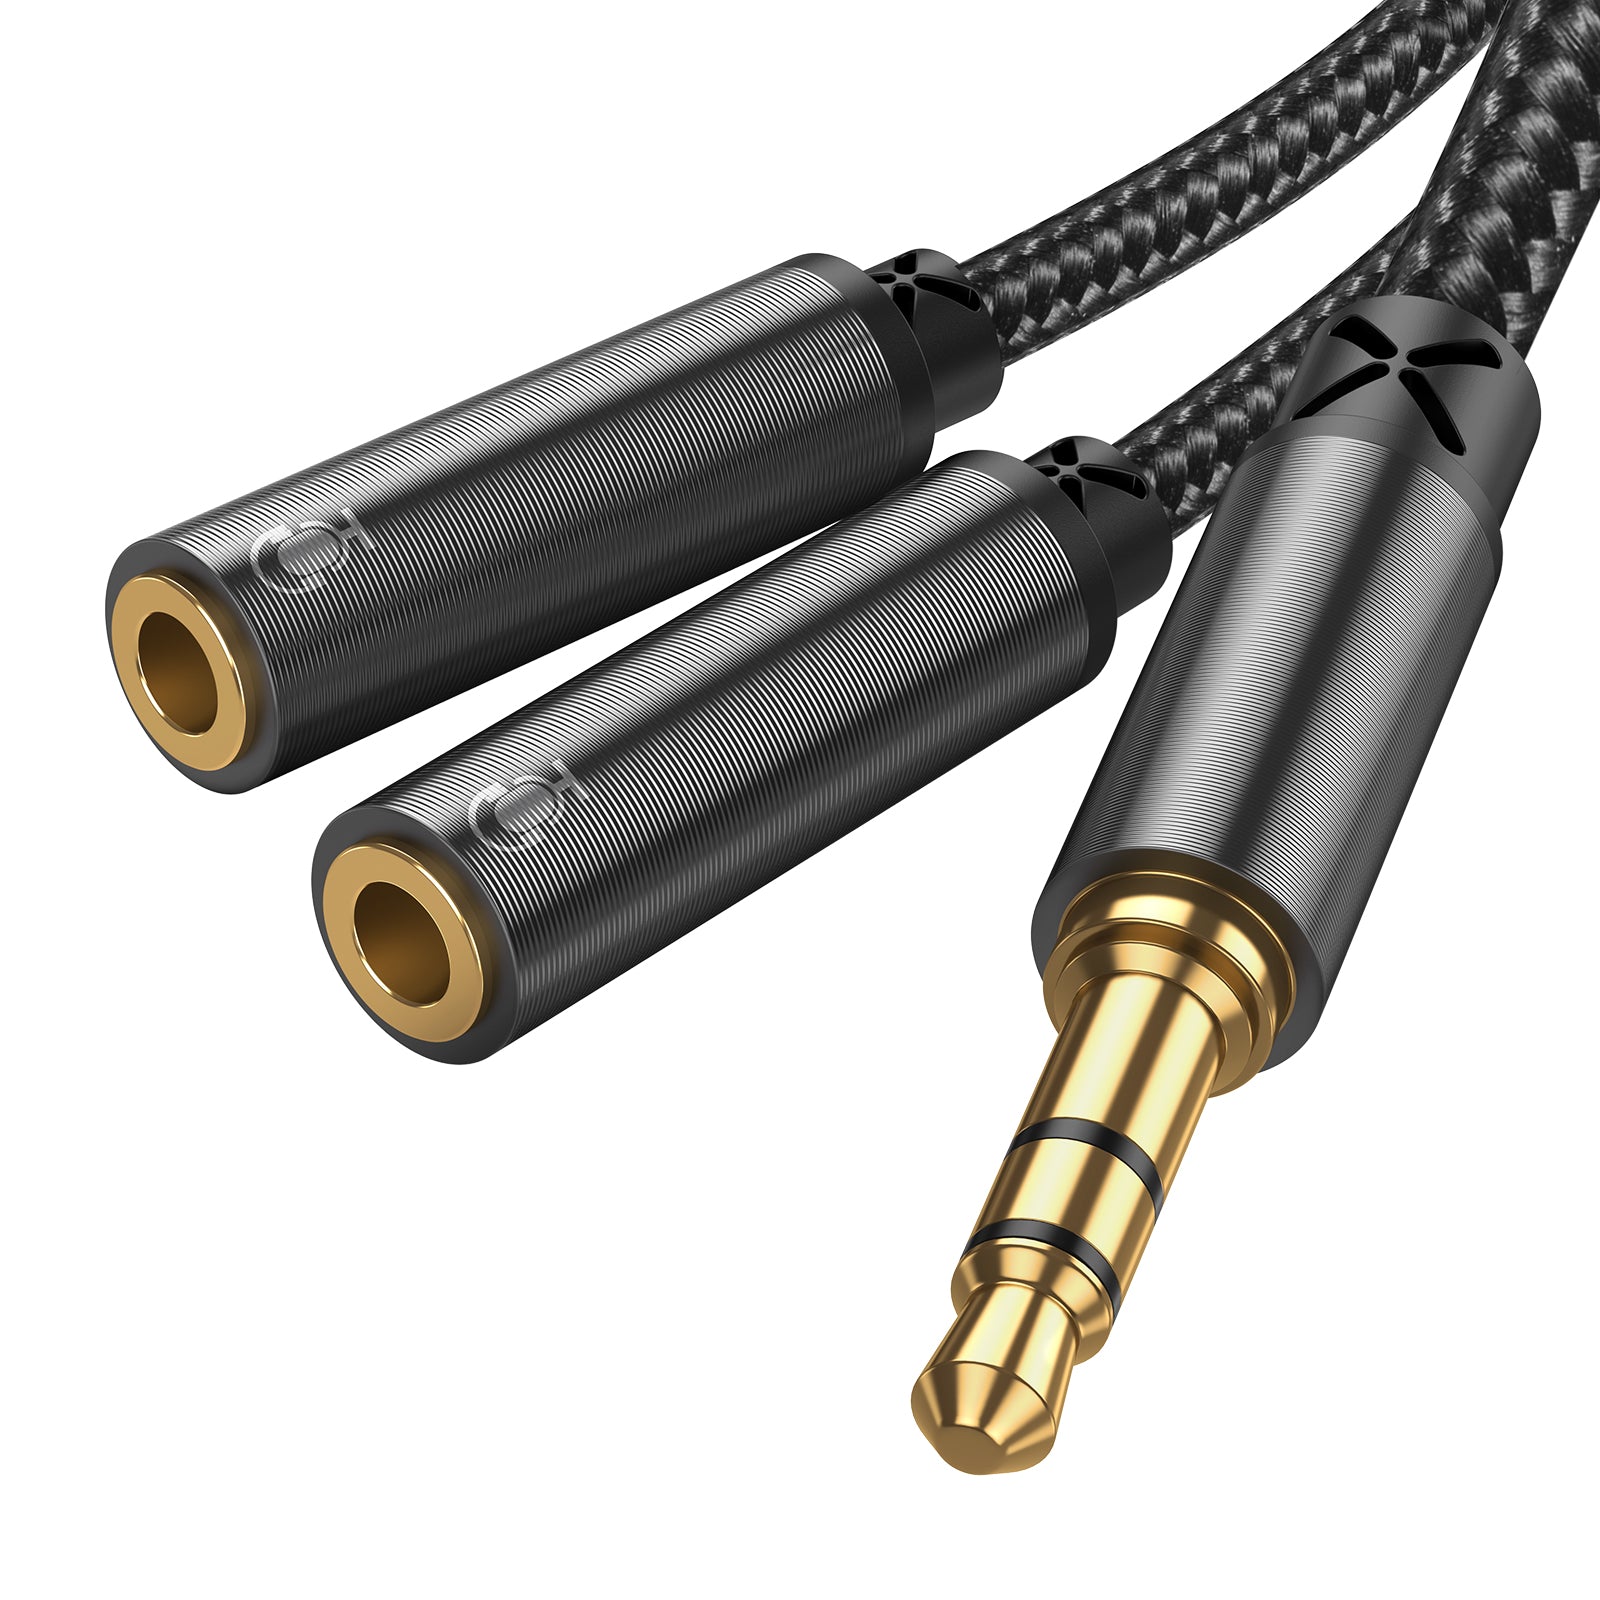 Joyroom Male To 2-Female Y-splitter Audio Cable